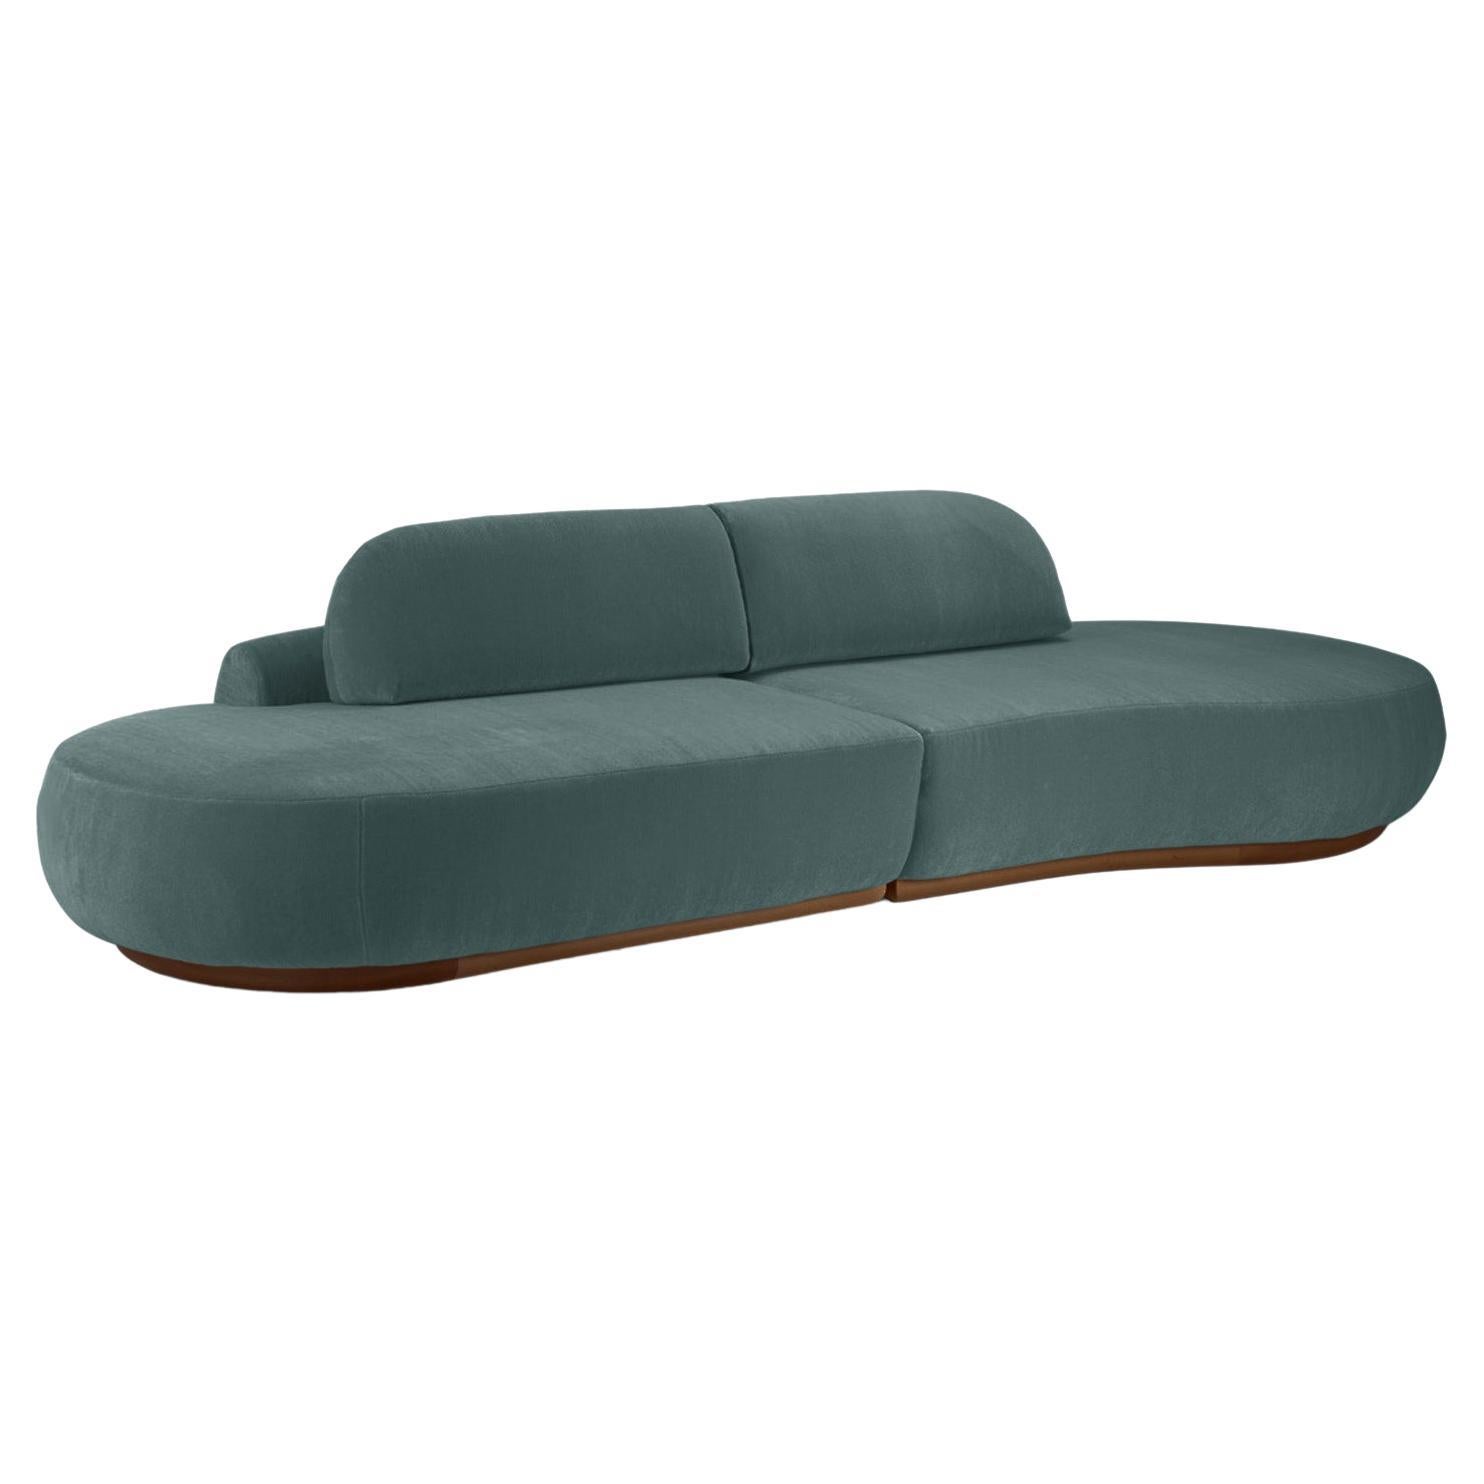 Naked Curved Sectional Sofa, 2 Piece with Beech Ash-056-1 and Teal